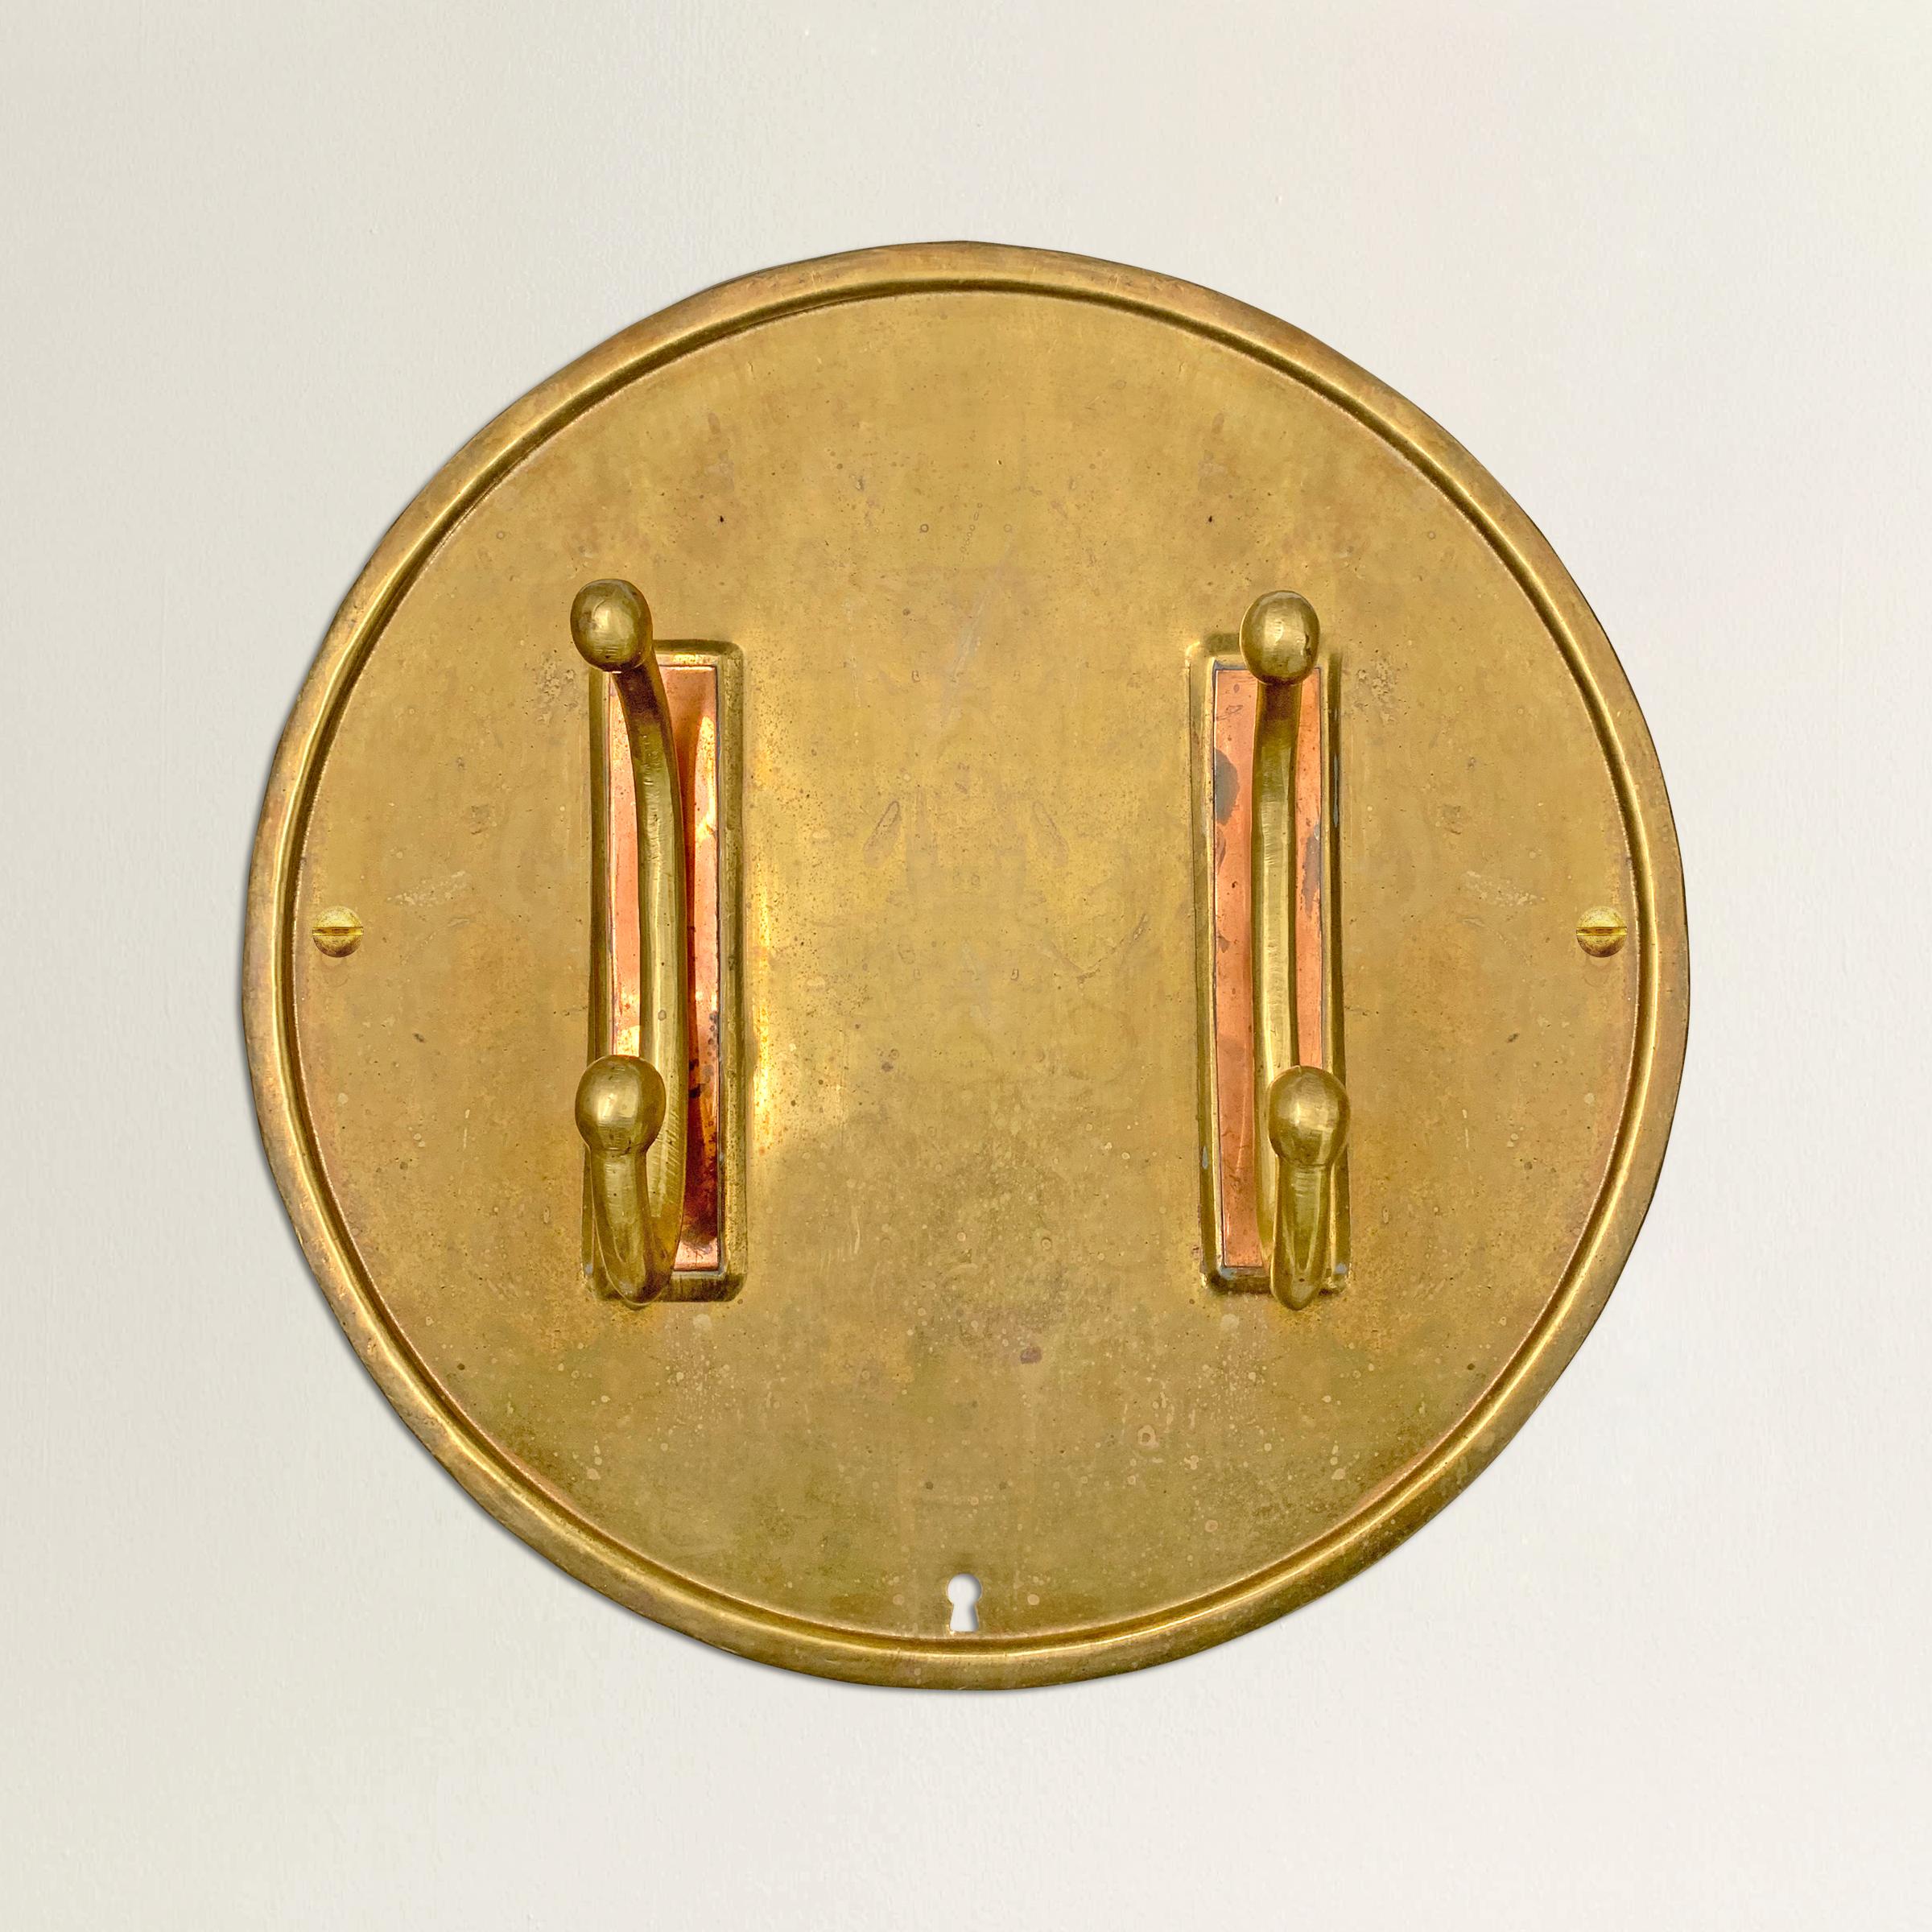 An über chic early 20th century English Arts & Crafts brass and copper coat rack with two hooks with copper backplates attached to a large round brass backplate, and a curious little cutout key hole at the bottom. We've left the finish untouched,